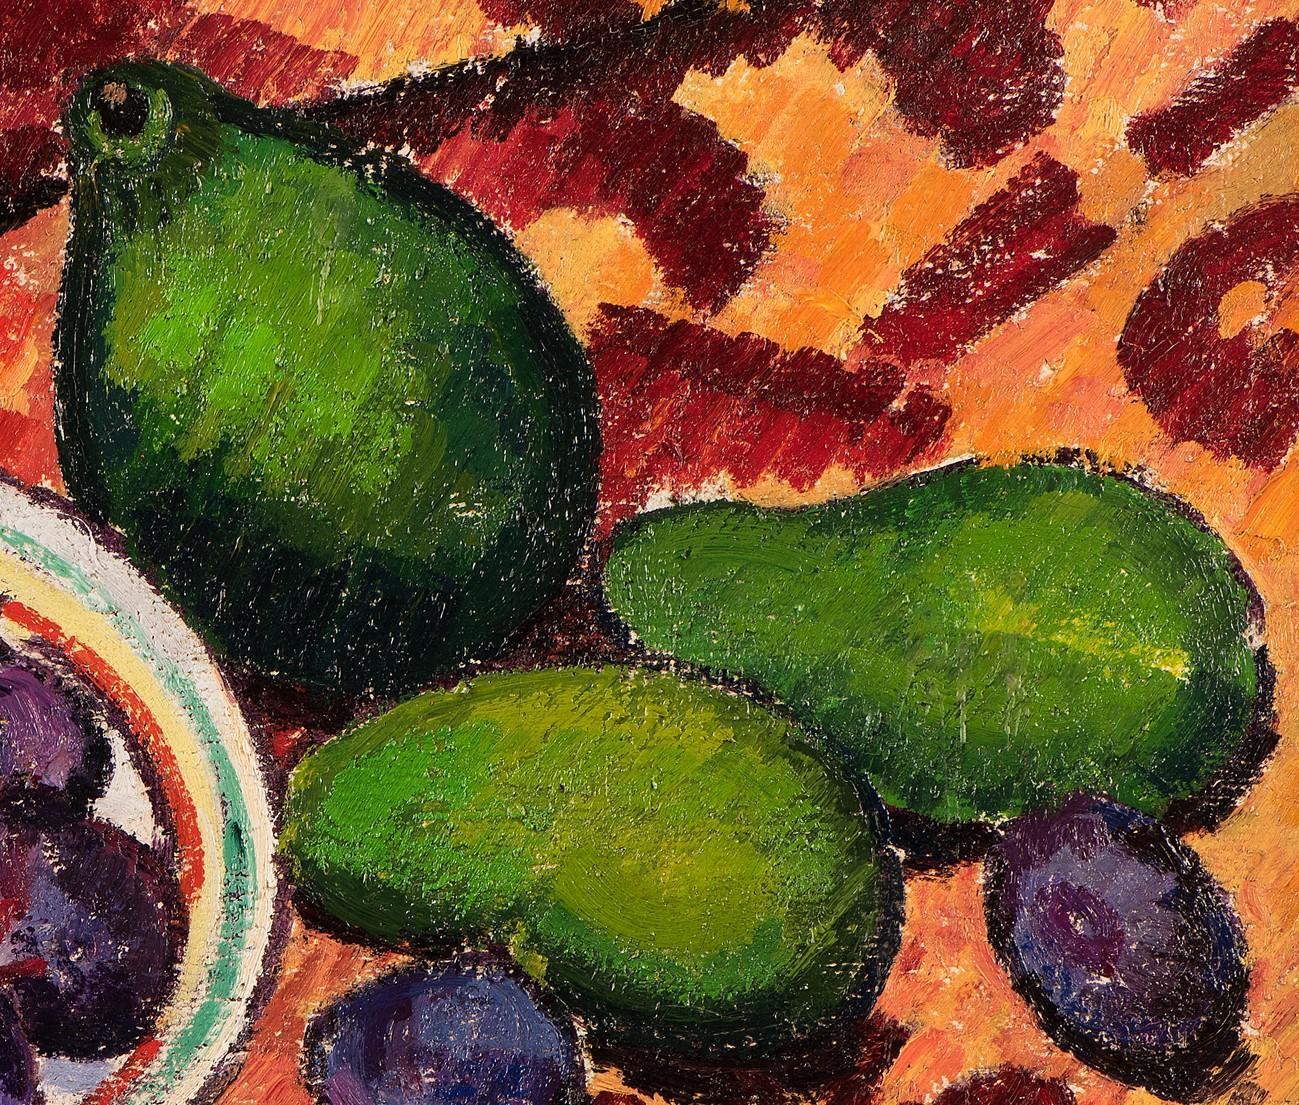 Still life with Avacodos and Figs  - Impressionist Painting by Louis Neillot